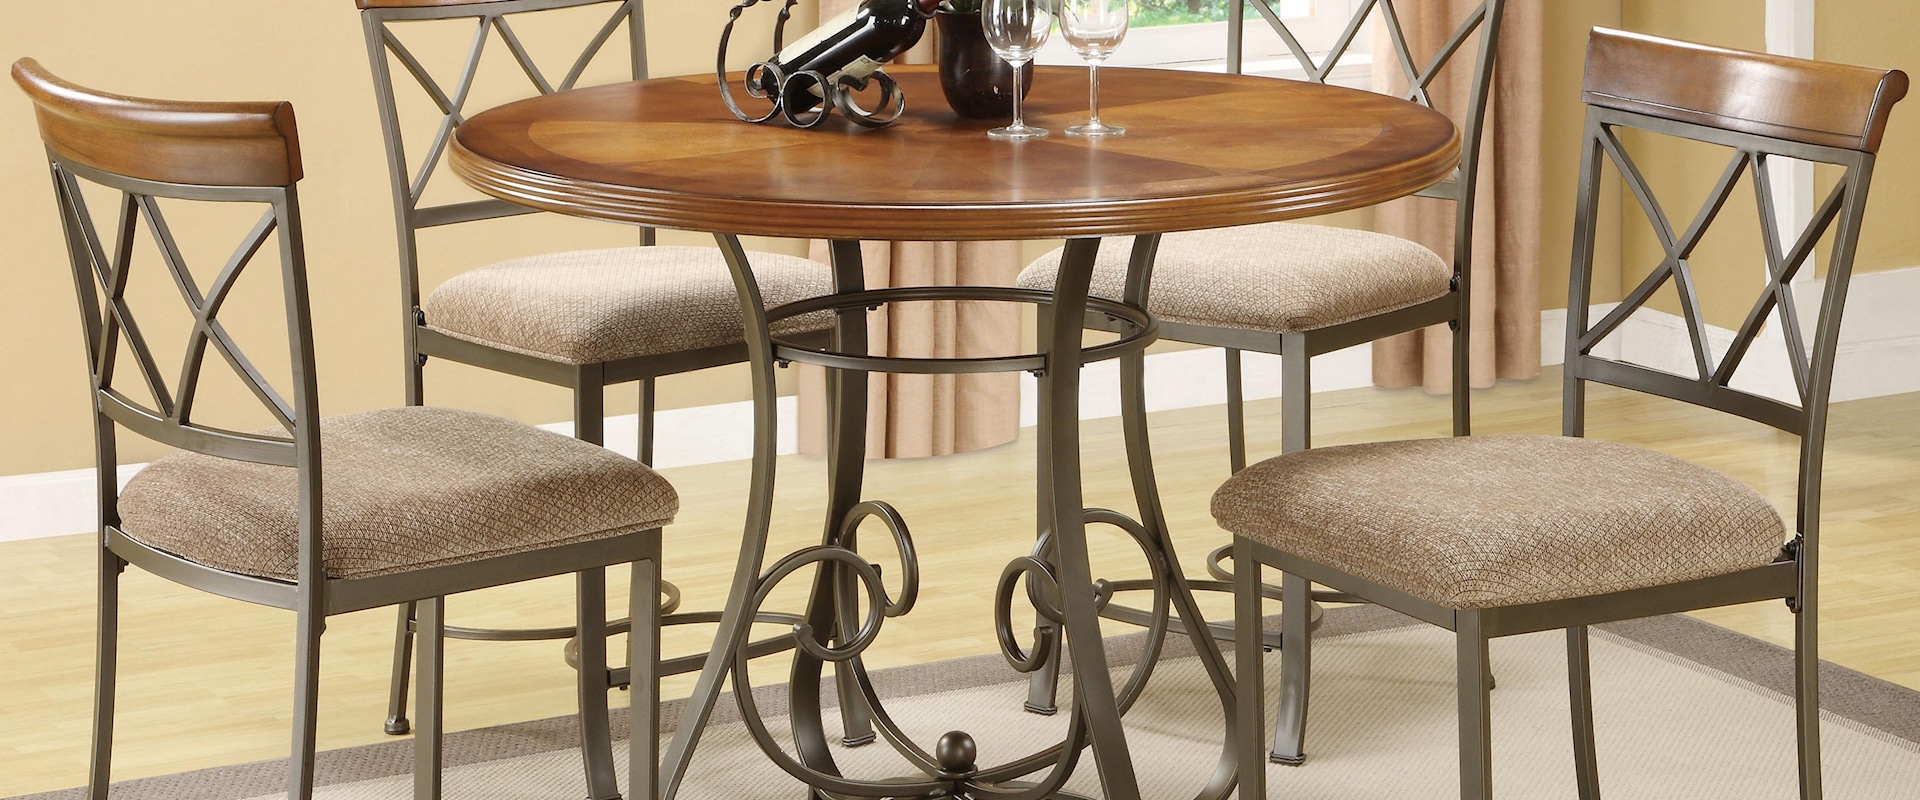 5 Piece Gathering Set with Upholstered Counter Stools